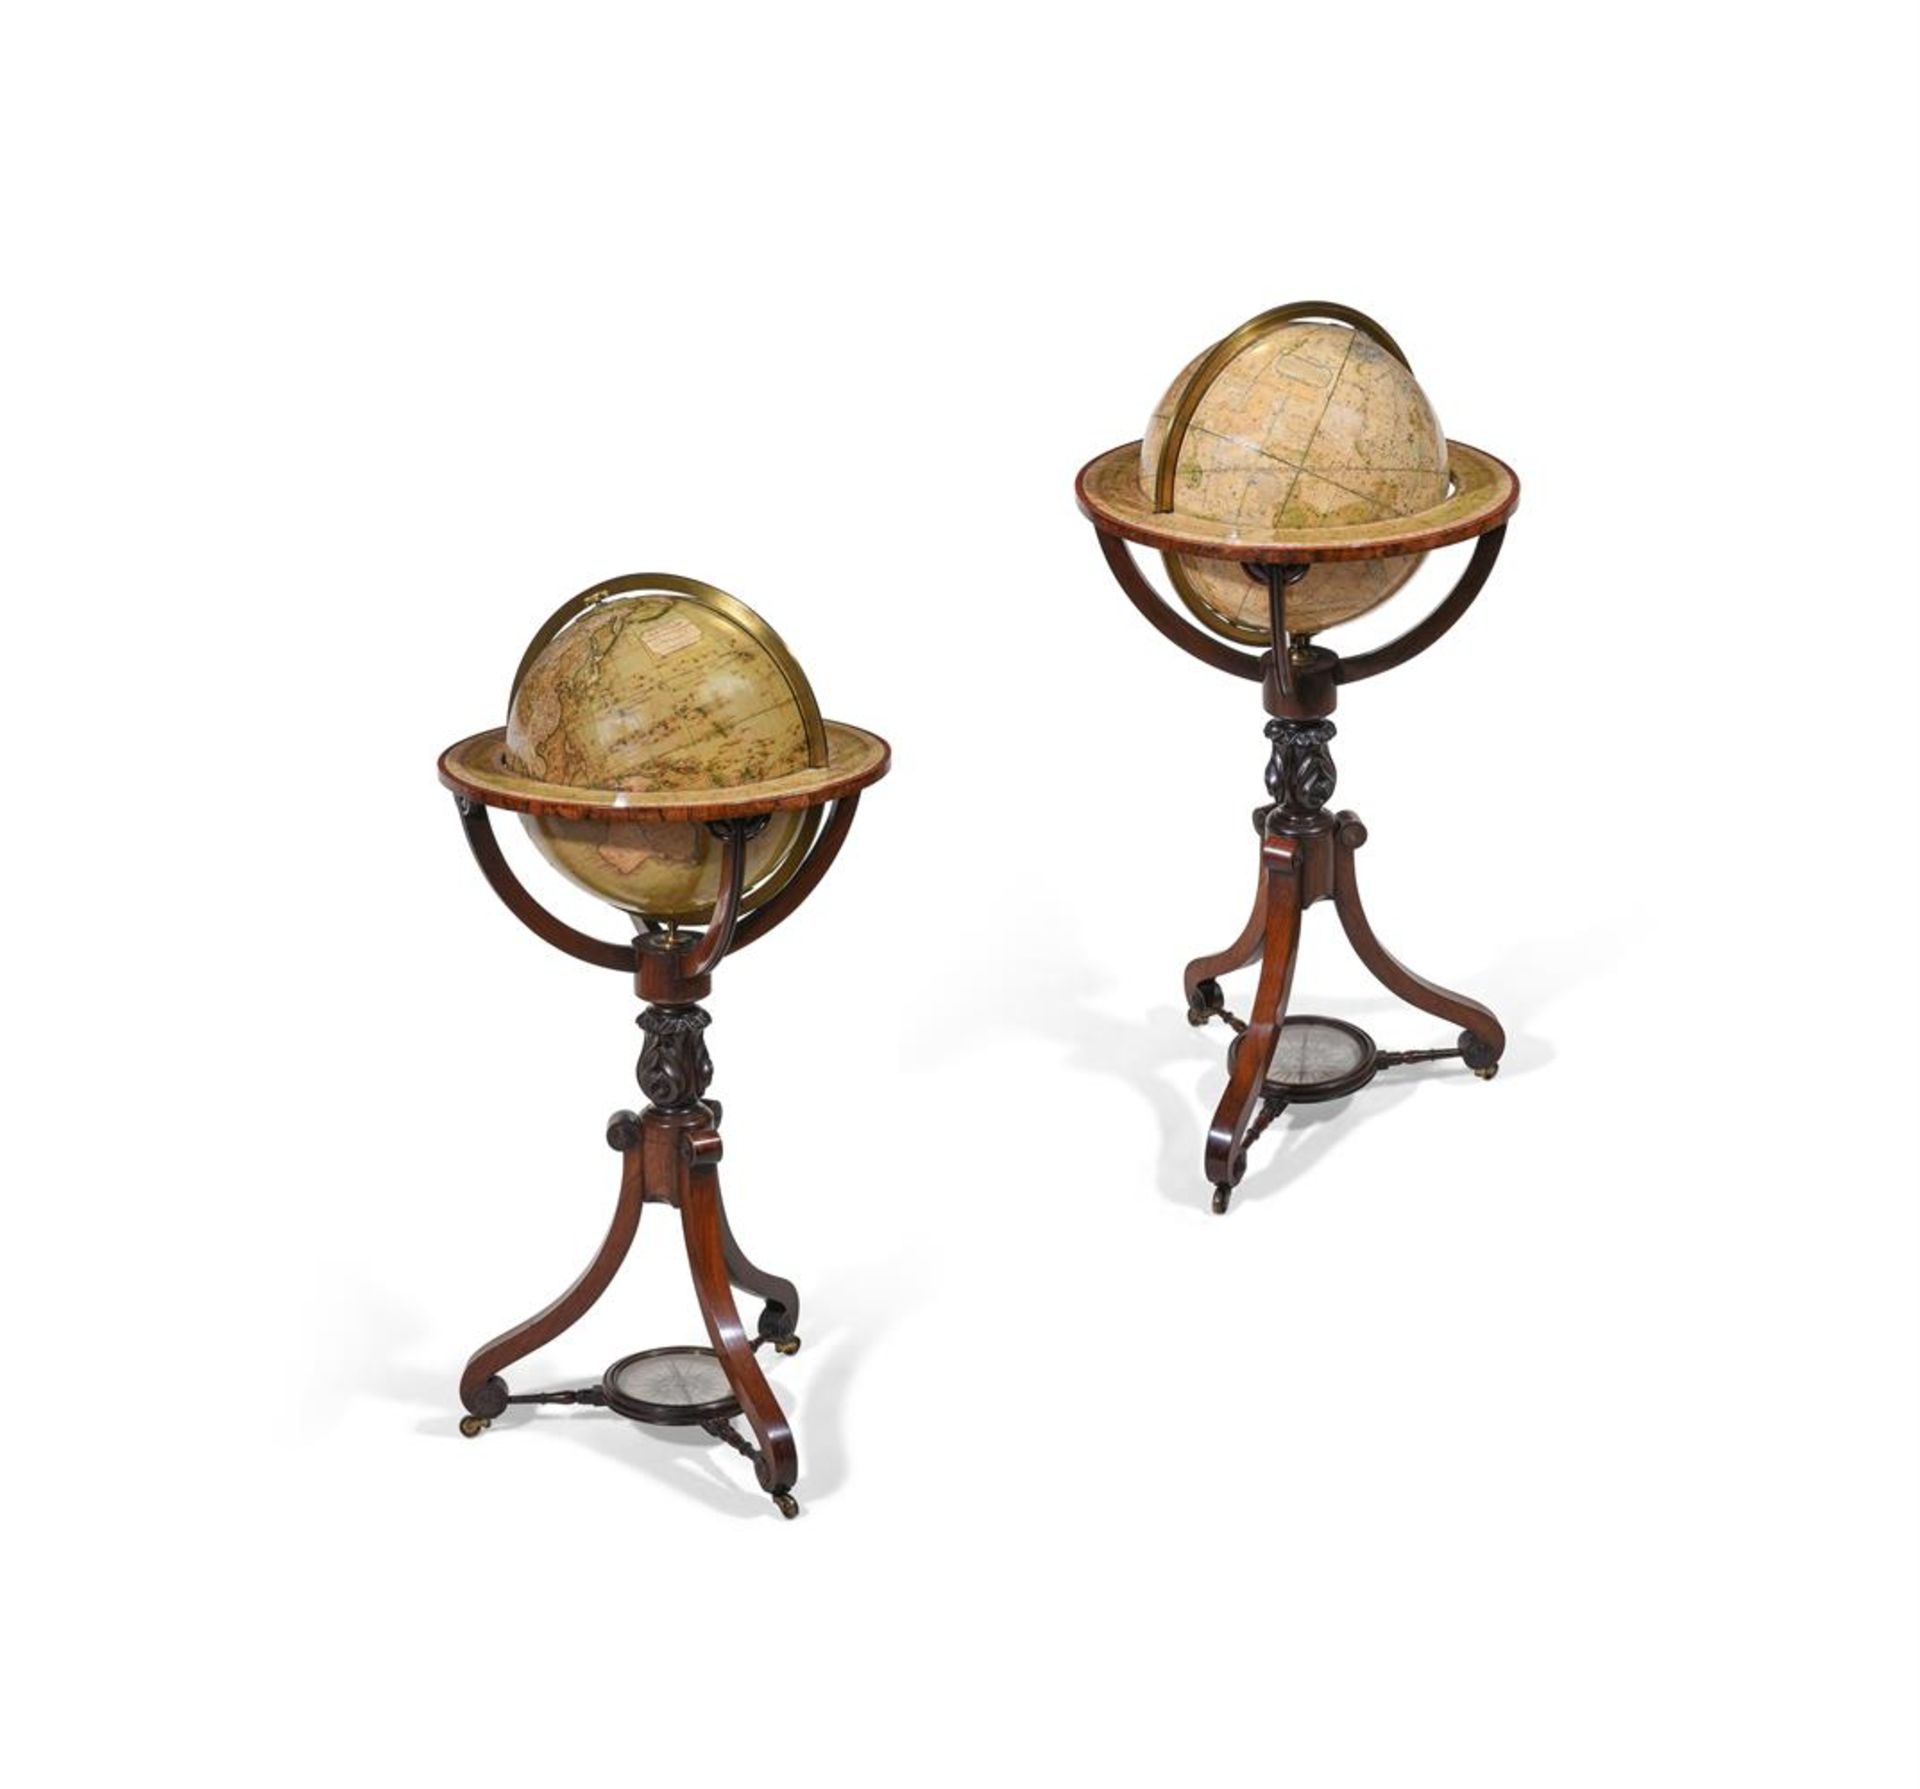 Y A PAIR OF TERRESTRIAL AND CELESTIAL 12 INCH LIBRARY GLOBES ON ROSEWOOD STANDS, BY NEWTON & SON